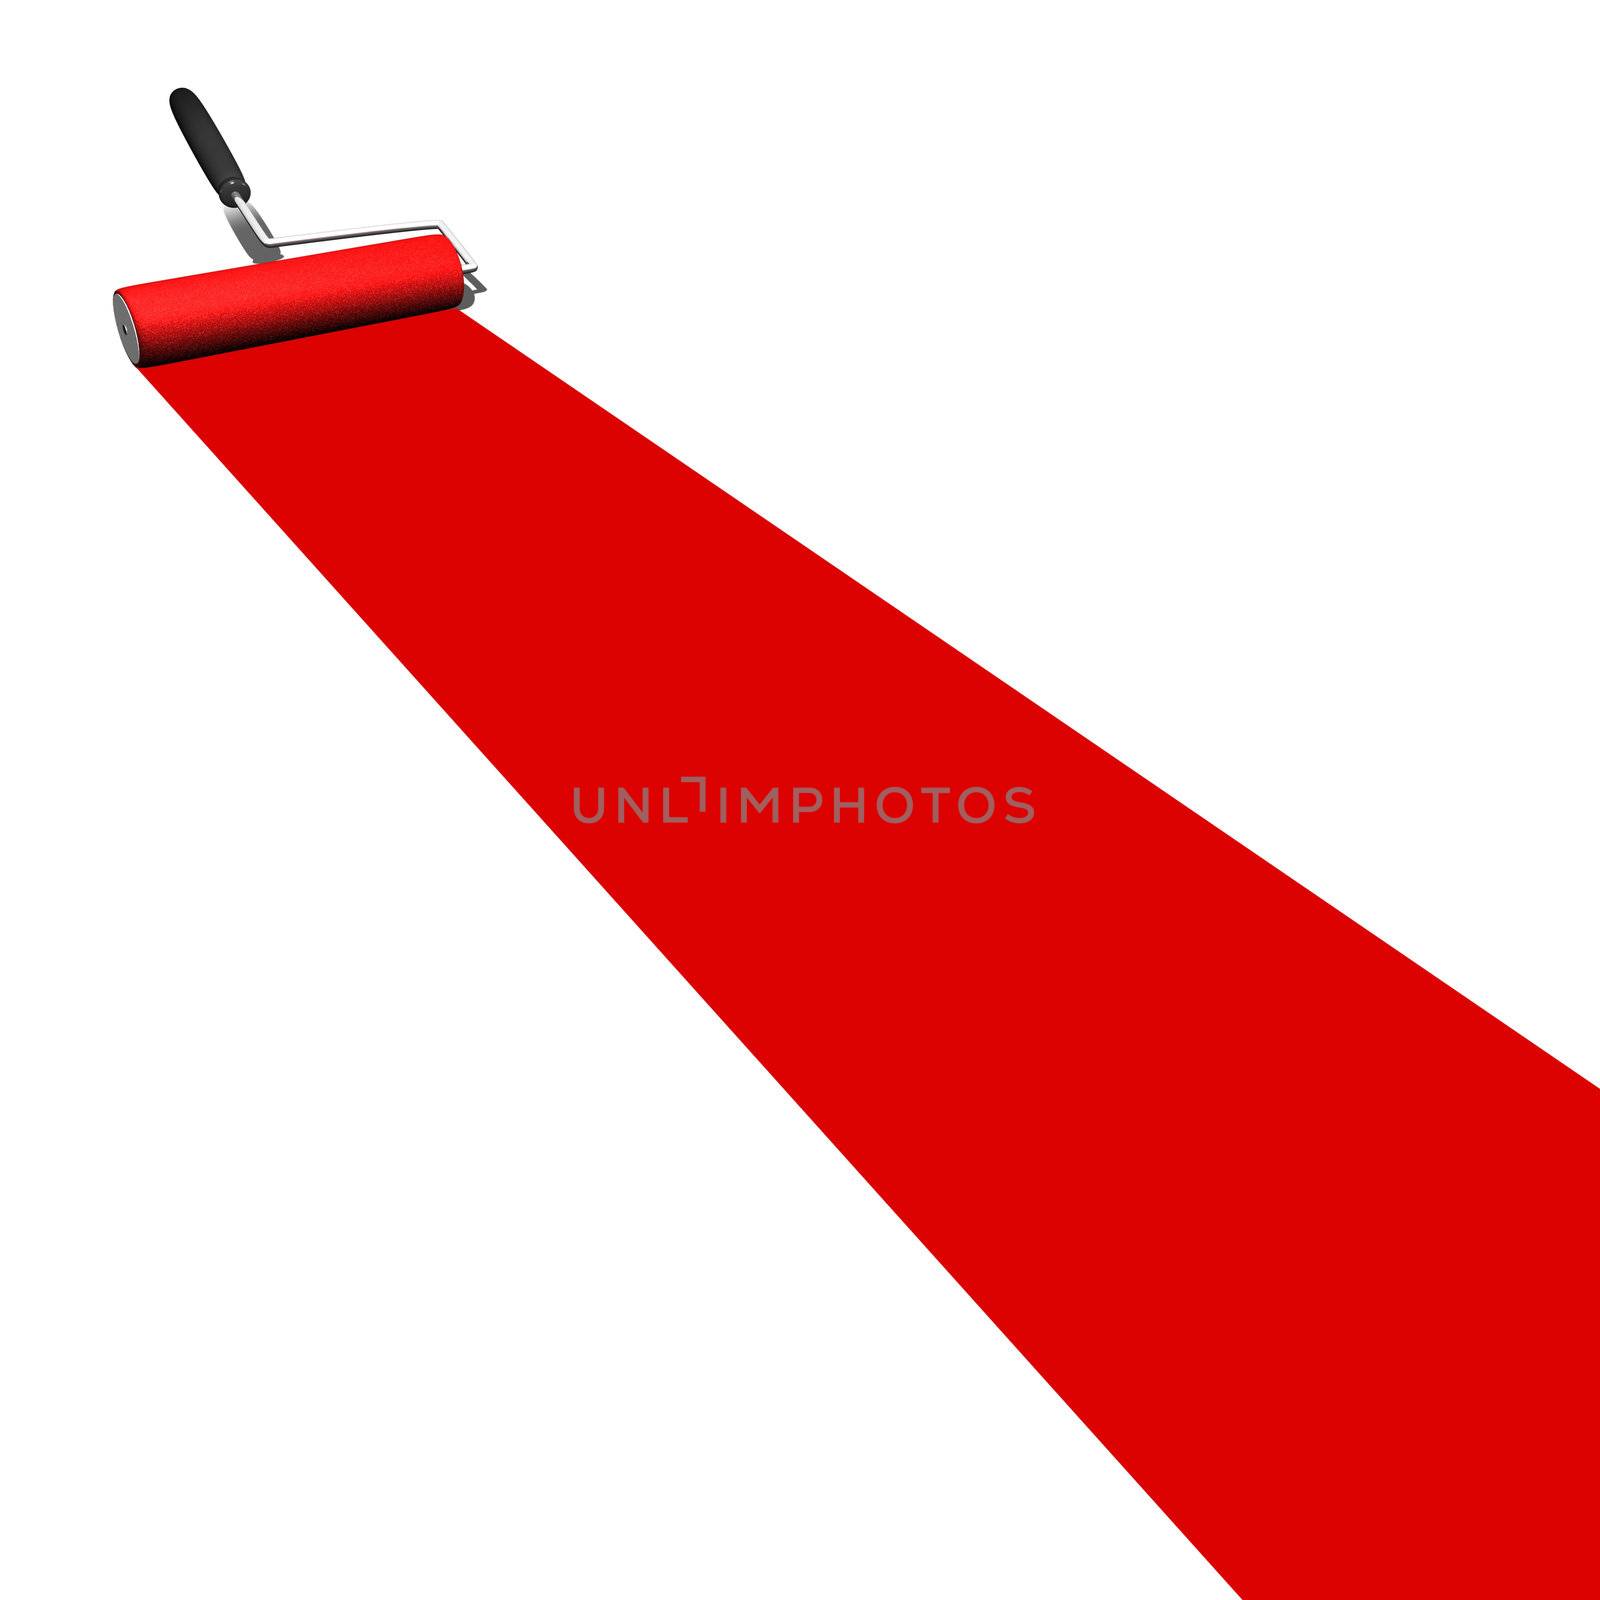 Image of a red paint roller isolated on a white background.